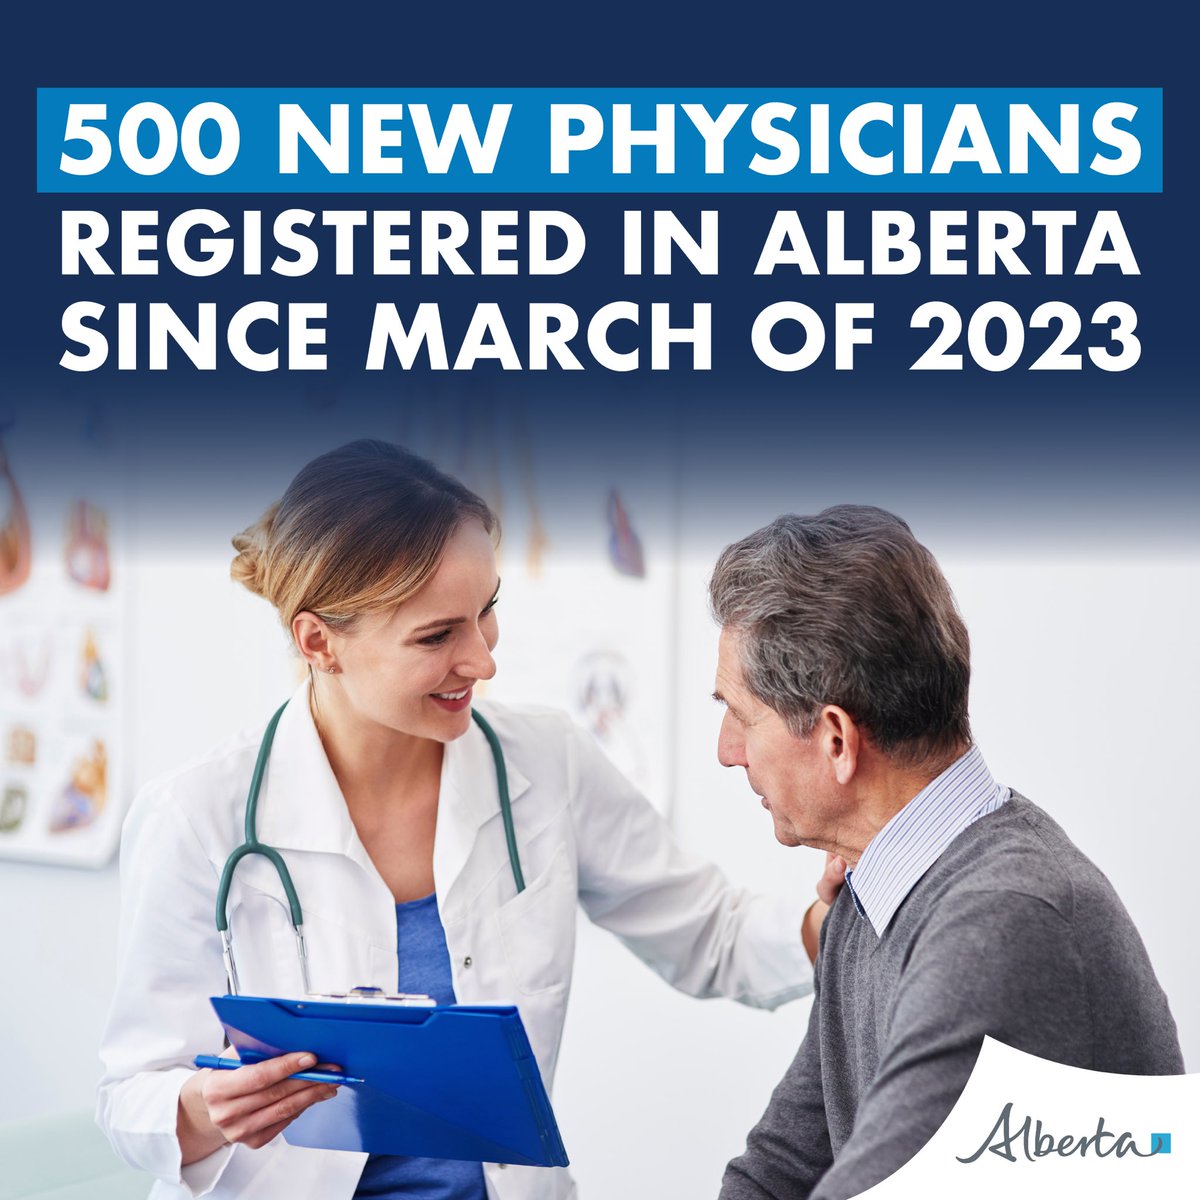 We are continuing to pull out all the stops to stabilize primary care and ensure Albertans have access to the care they need, where and when they need it. It’s a shame the NDP is referencing data from 2022. According to the CPSA, Alberta added over 500 new doctors since March…